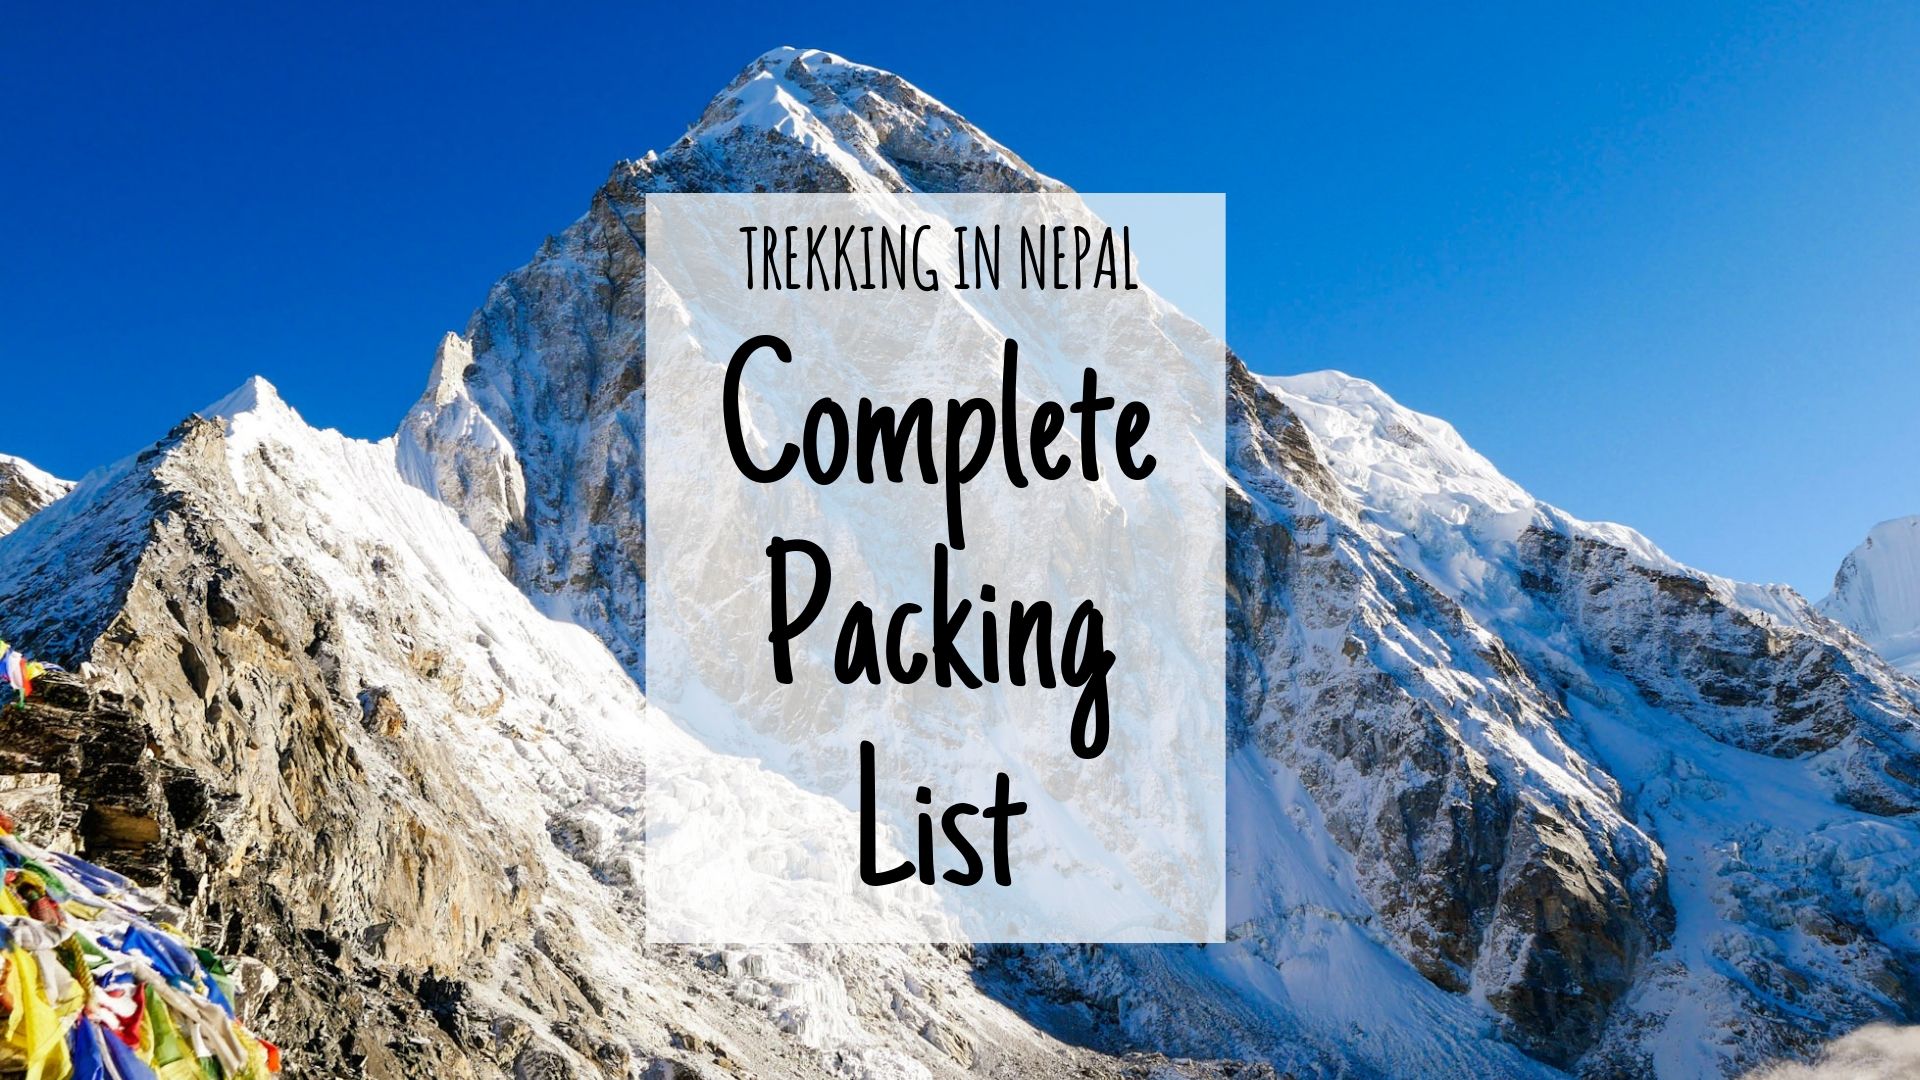 Everest Base Camp Packing List, Annapurna Circuit Packing List, Trekking in Nepal Packing List Ultimate List for What to Pack for Nepal treks in the Himalayas